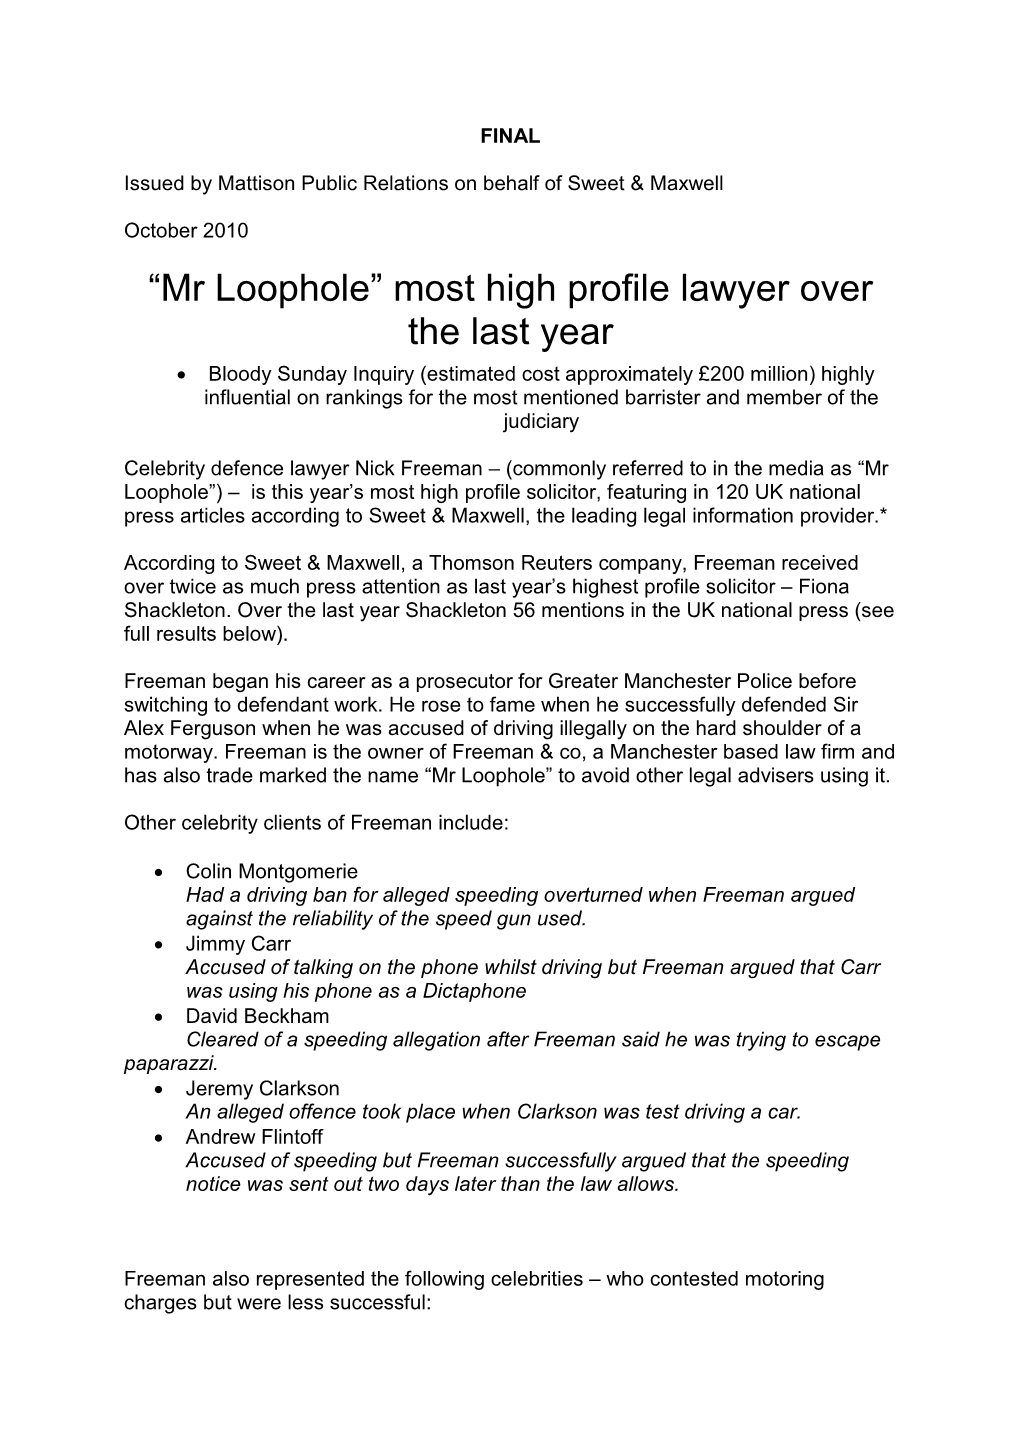 Mr Loophole” Most High Profile Lawyer Over the Last Year